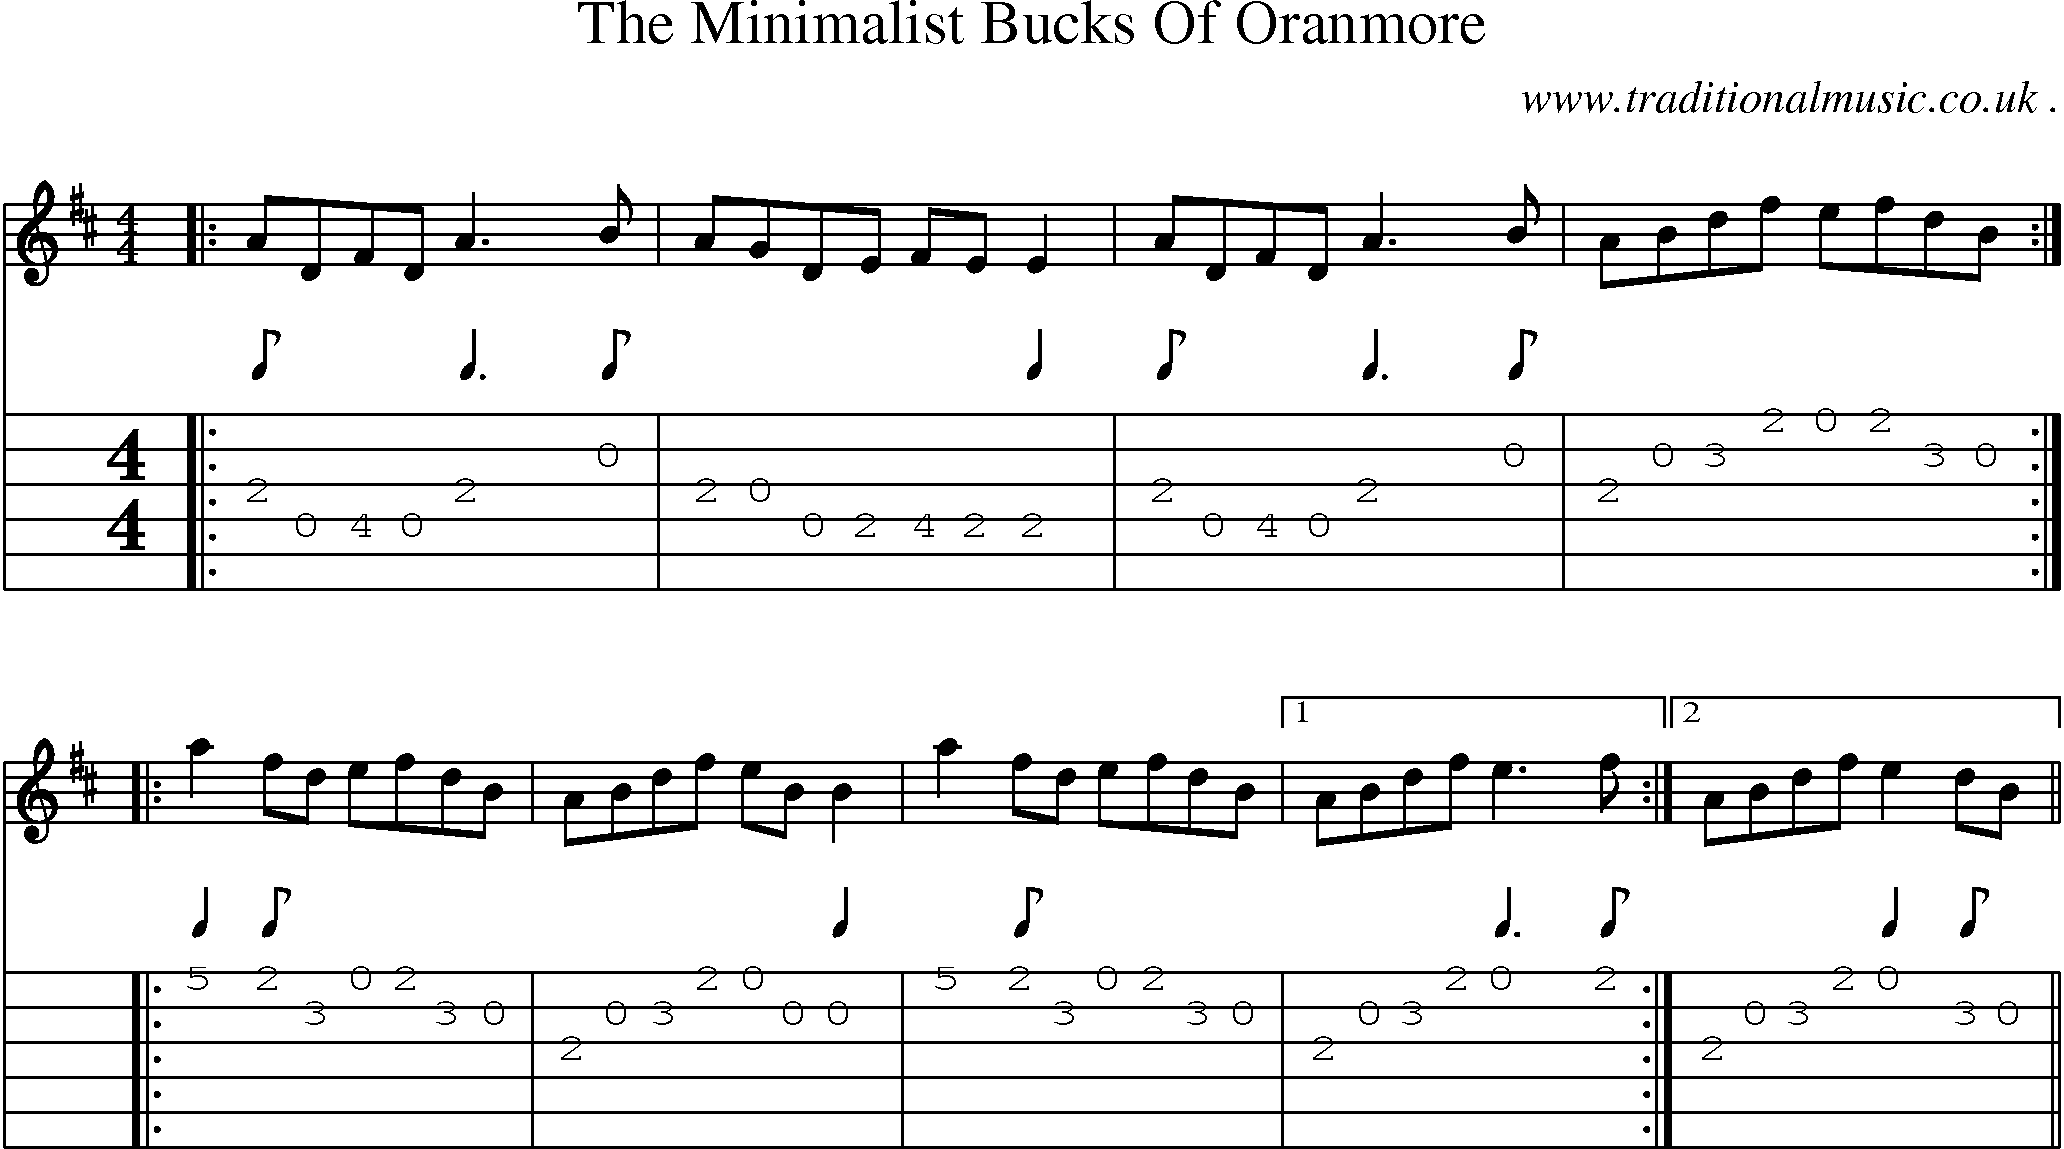 Sheet-Music and Guitar Tabs for The Minimalist Bucks Of Oranmore